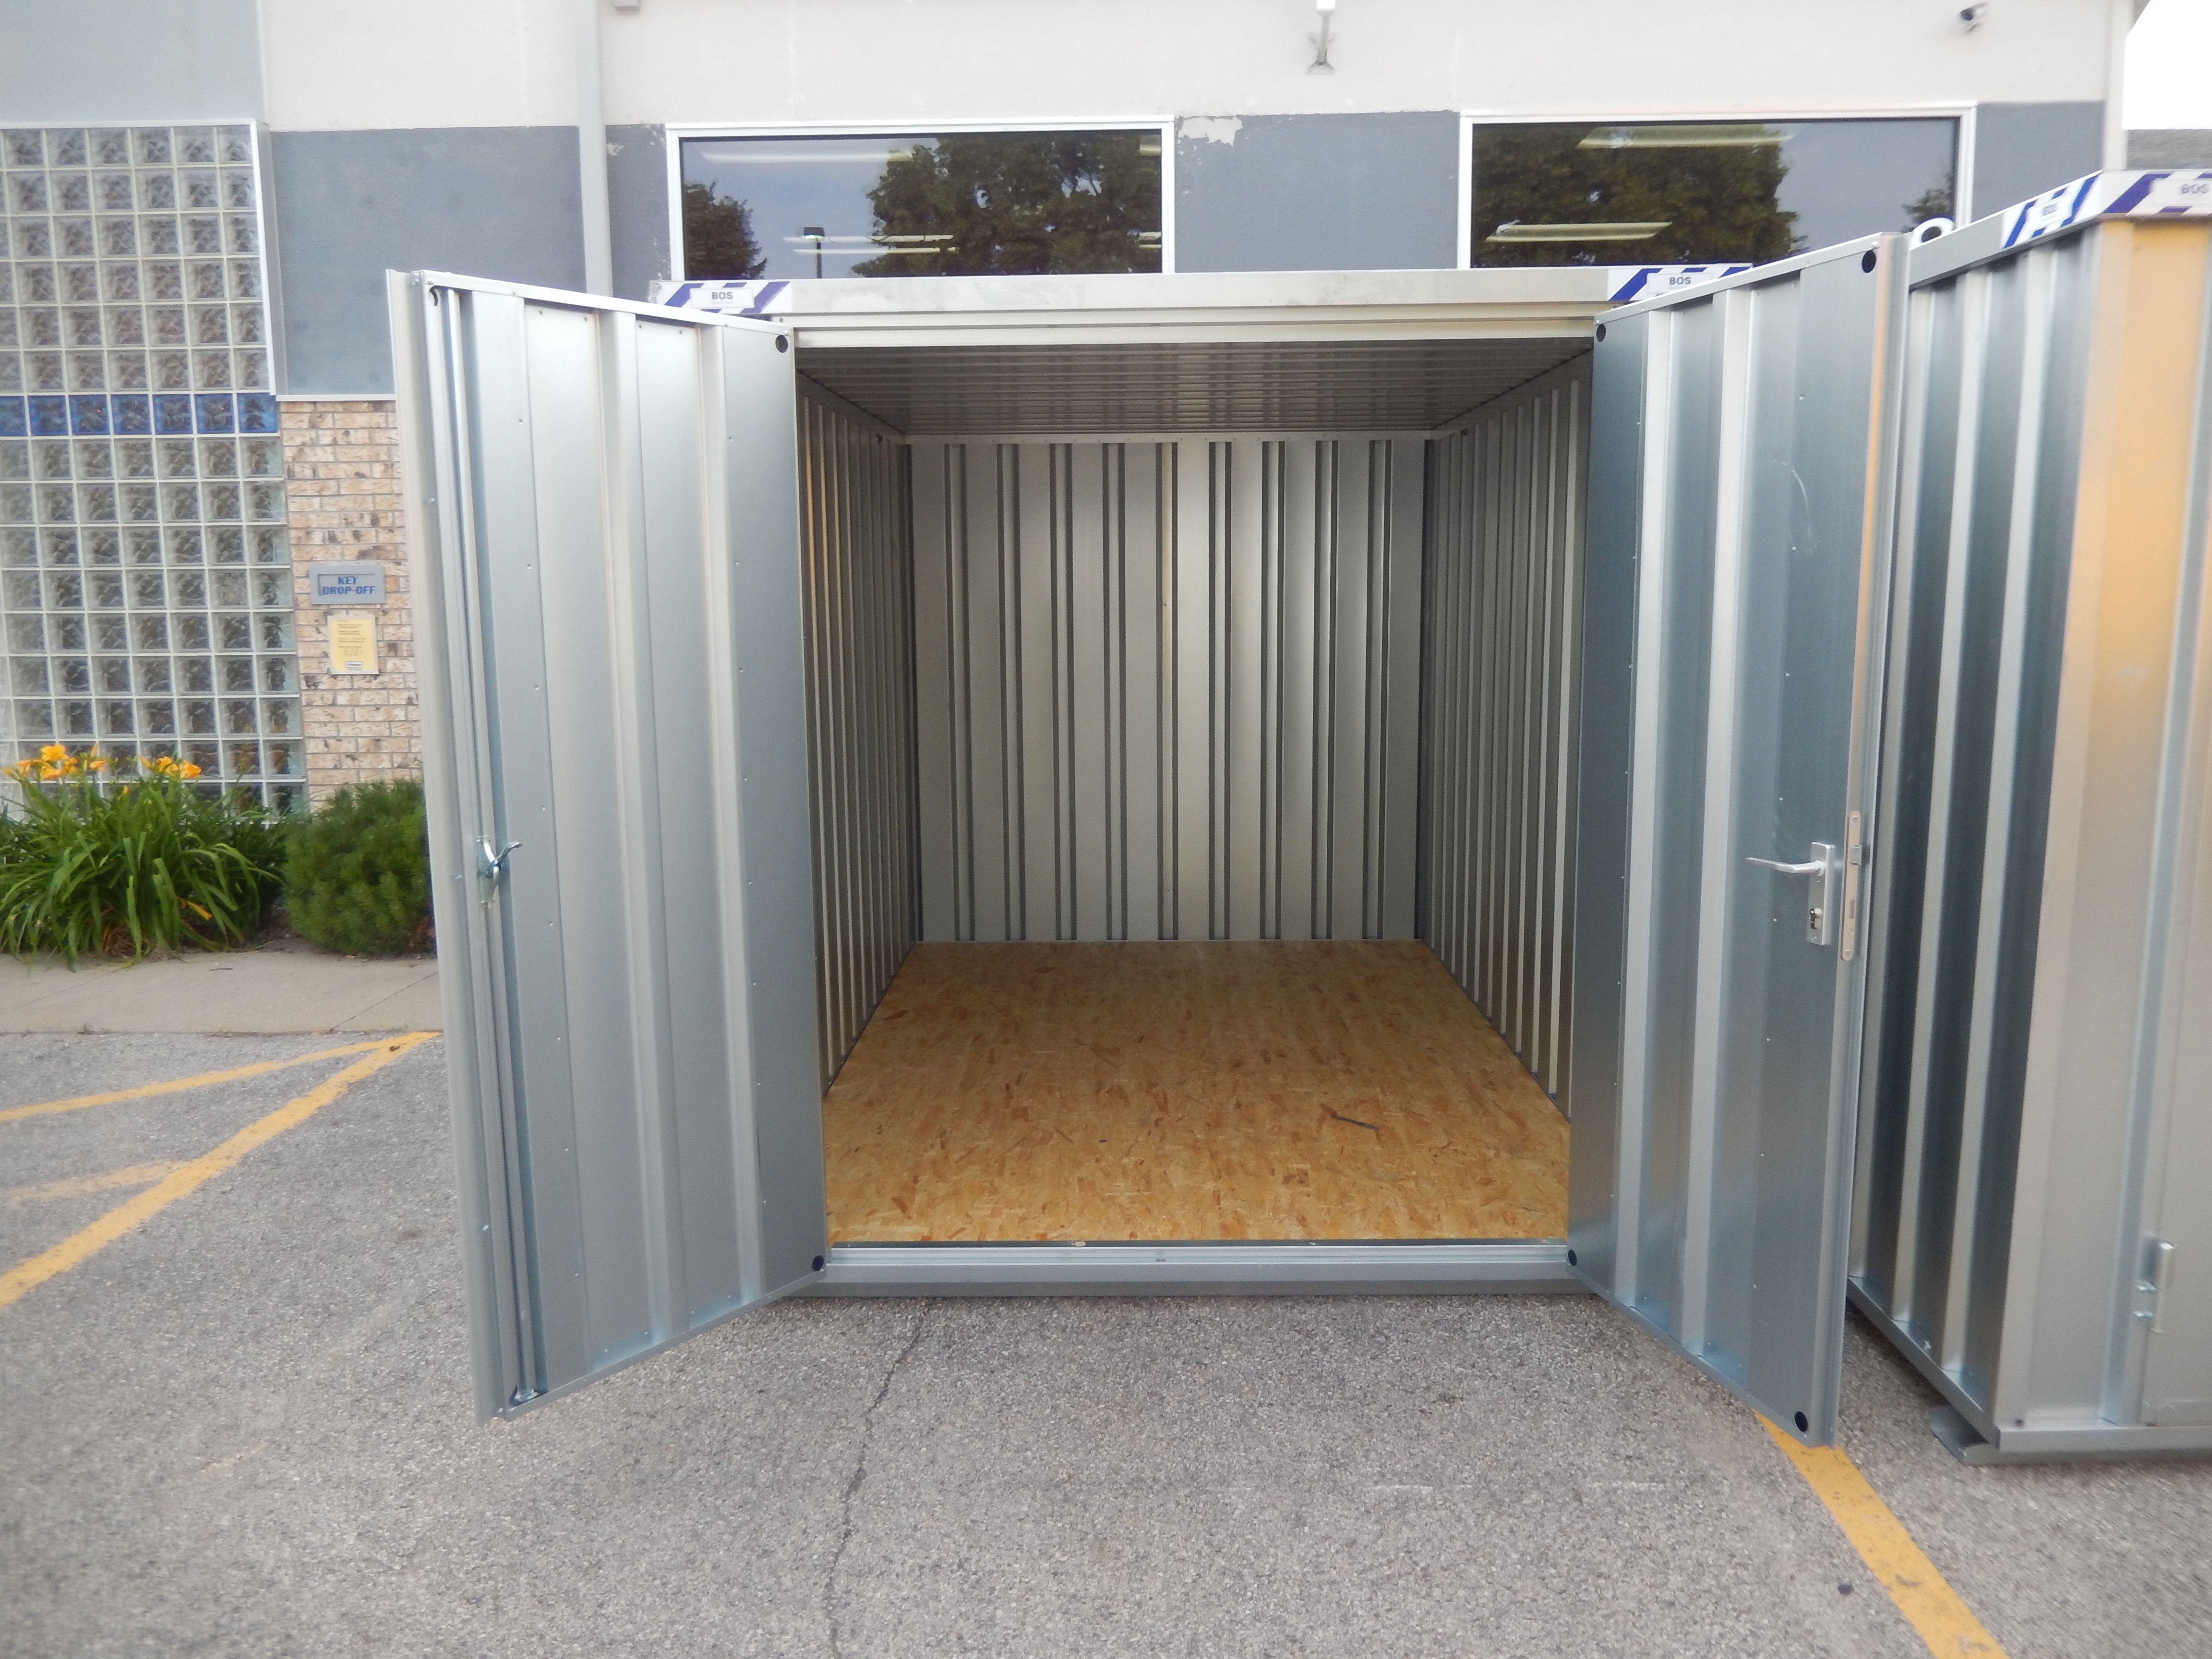 Rent a Storage Container with doors in Iowa City &amp; Cedar ...